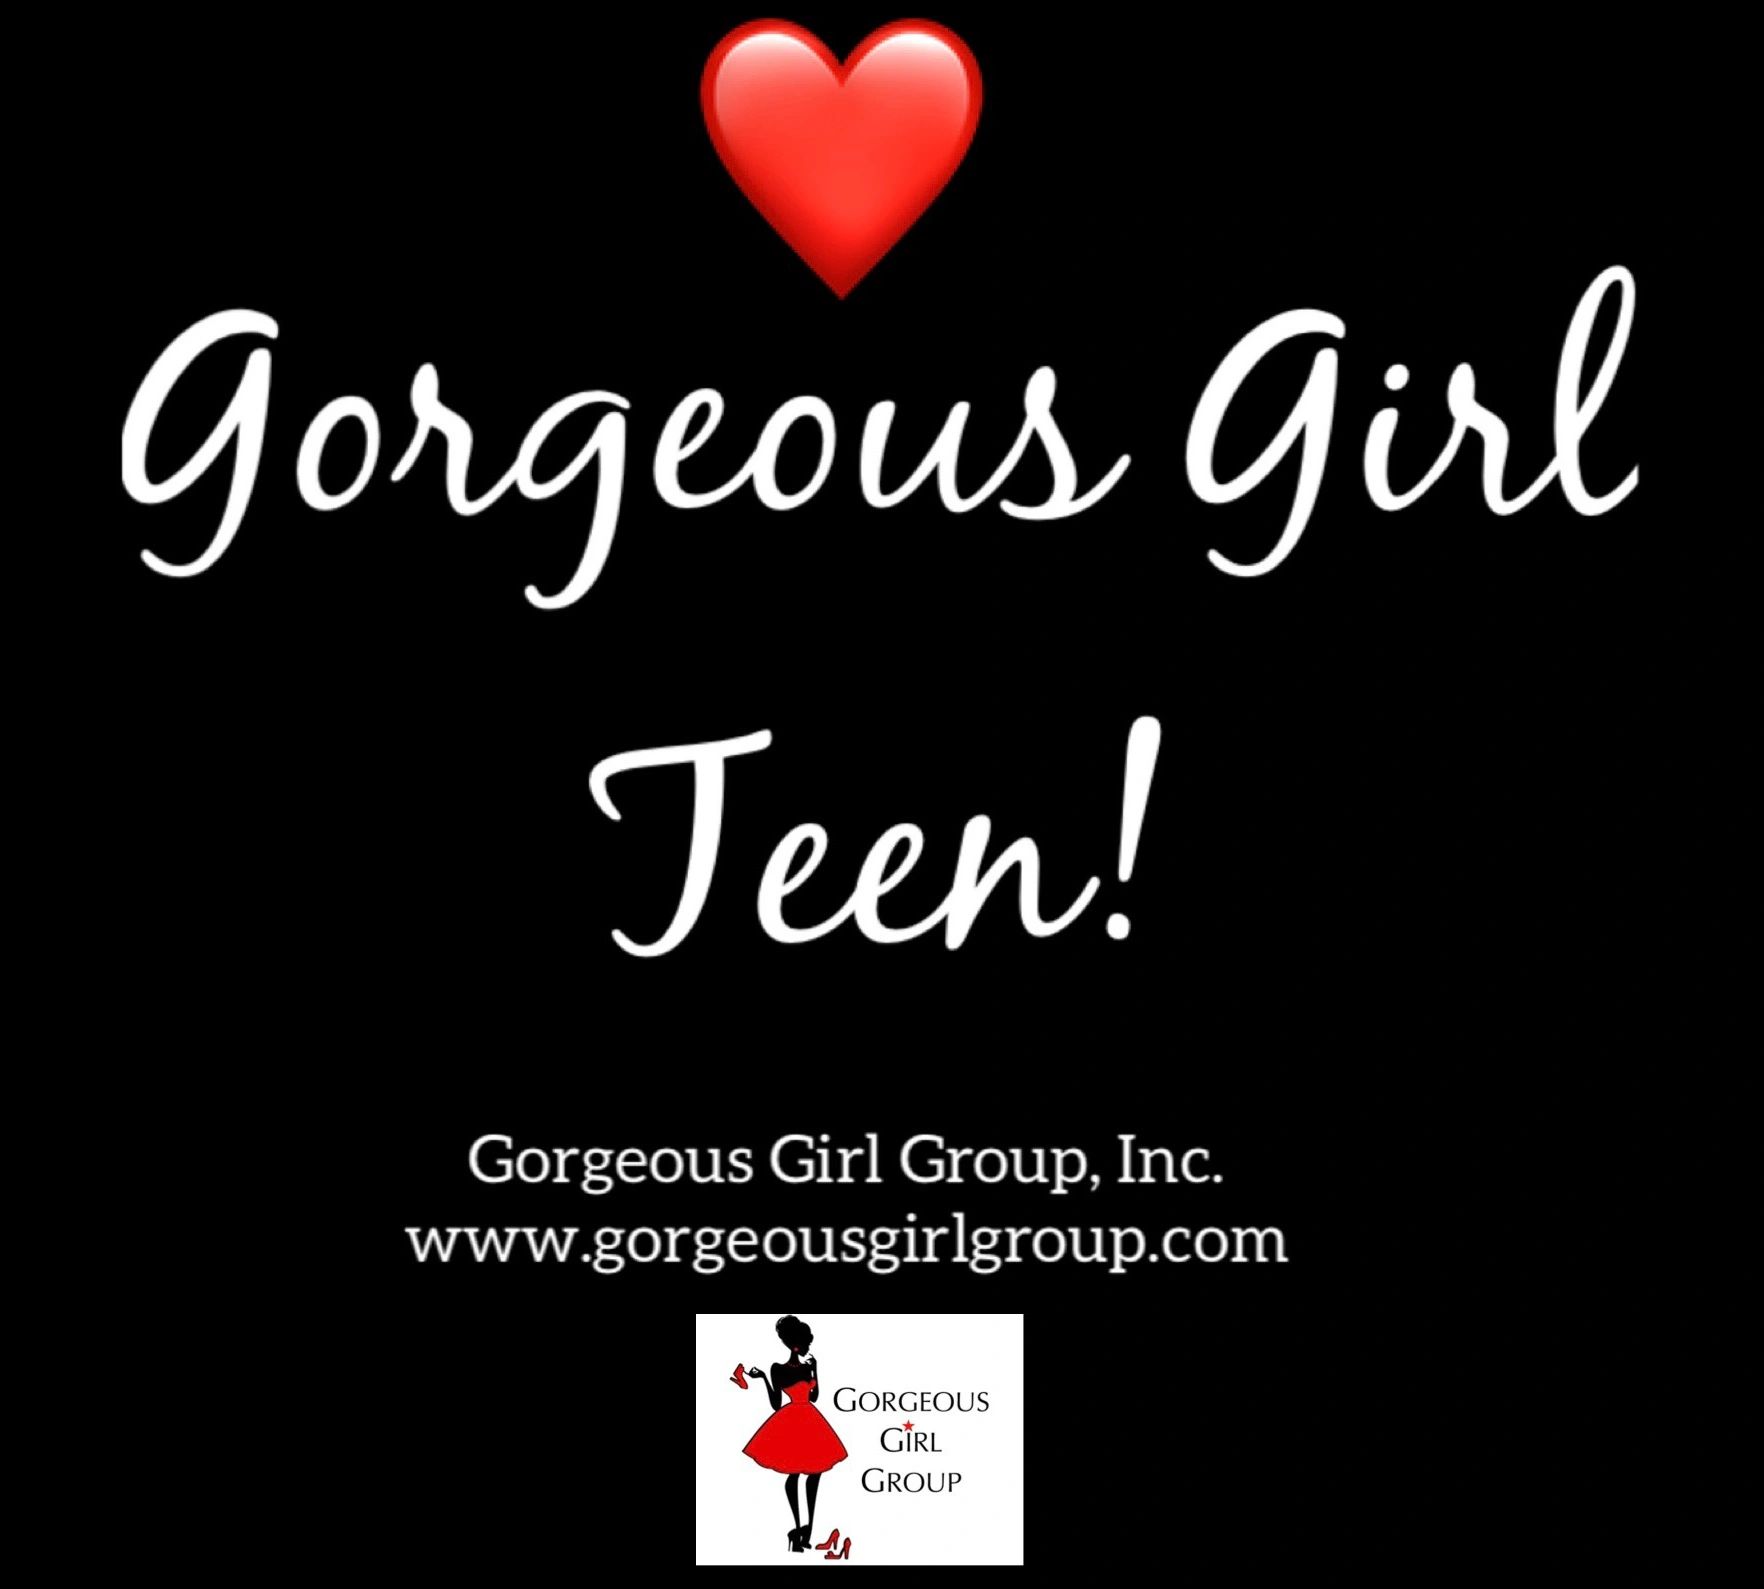 Dear Future Gorgeous Girl Teen Members,

My message for the next Gorgeous Girl Teen Life Leadership 